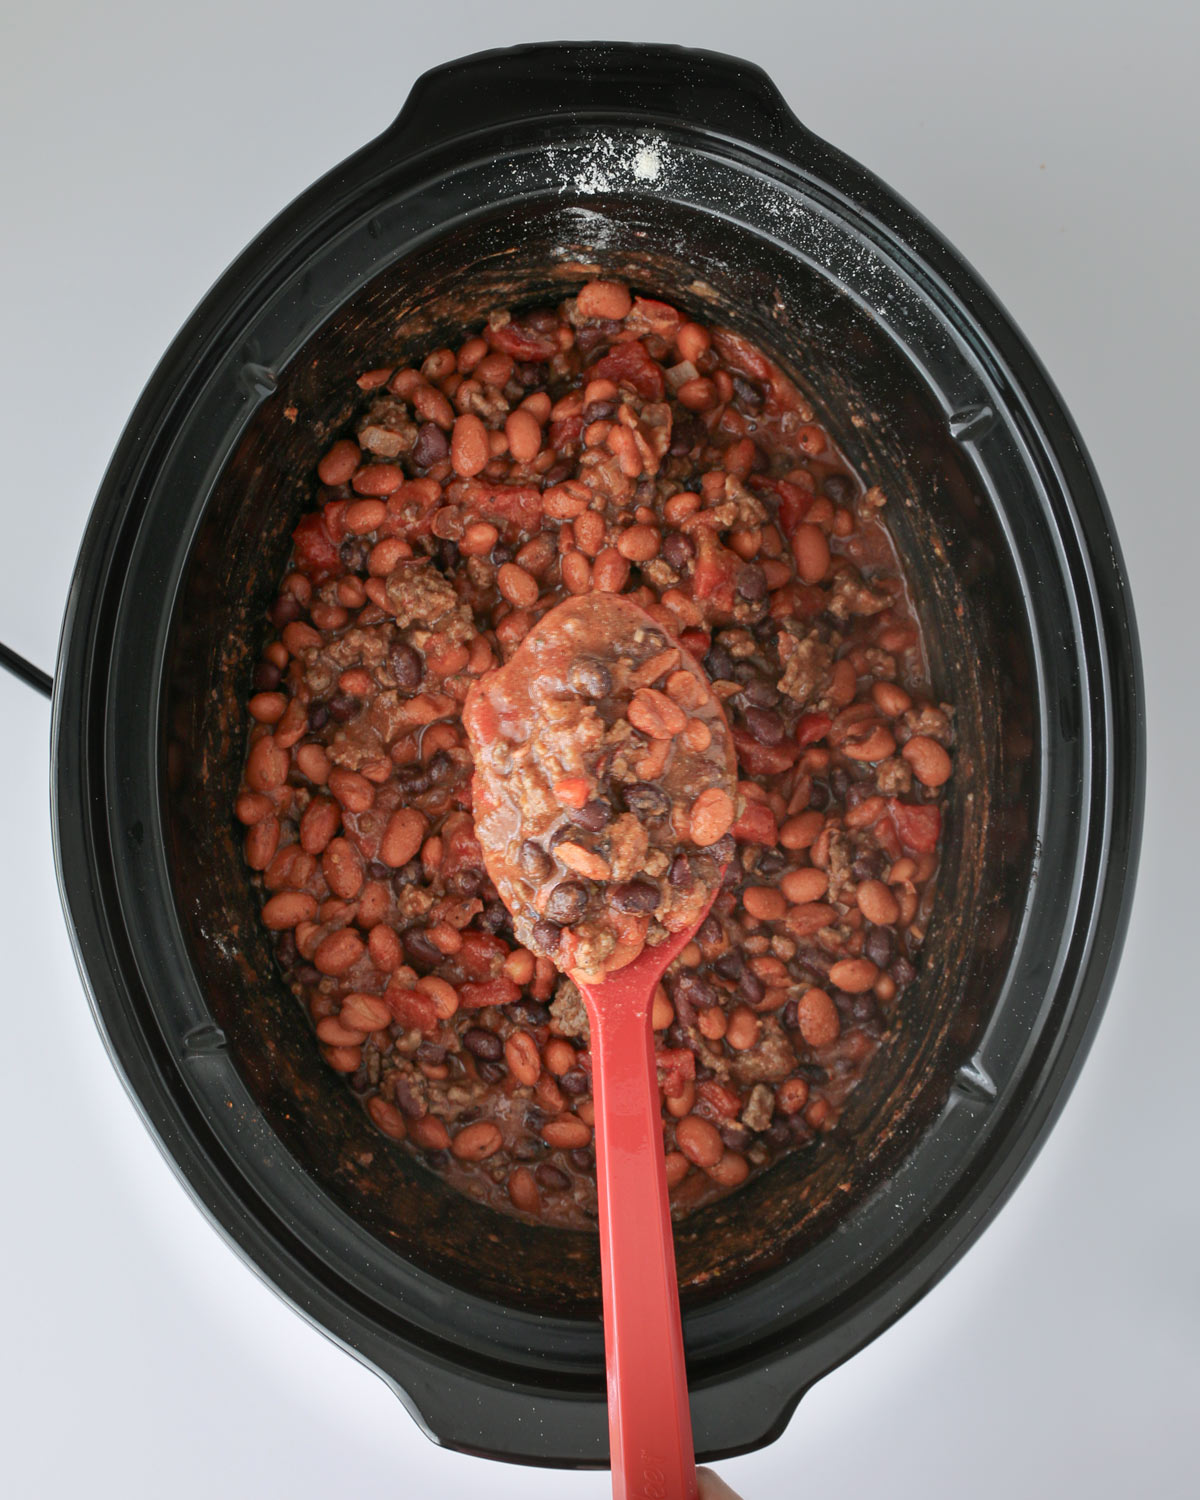 crockpot of chili, with a red spoon holding a big scoop of chili.